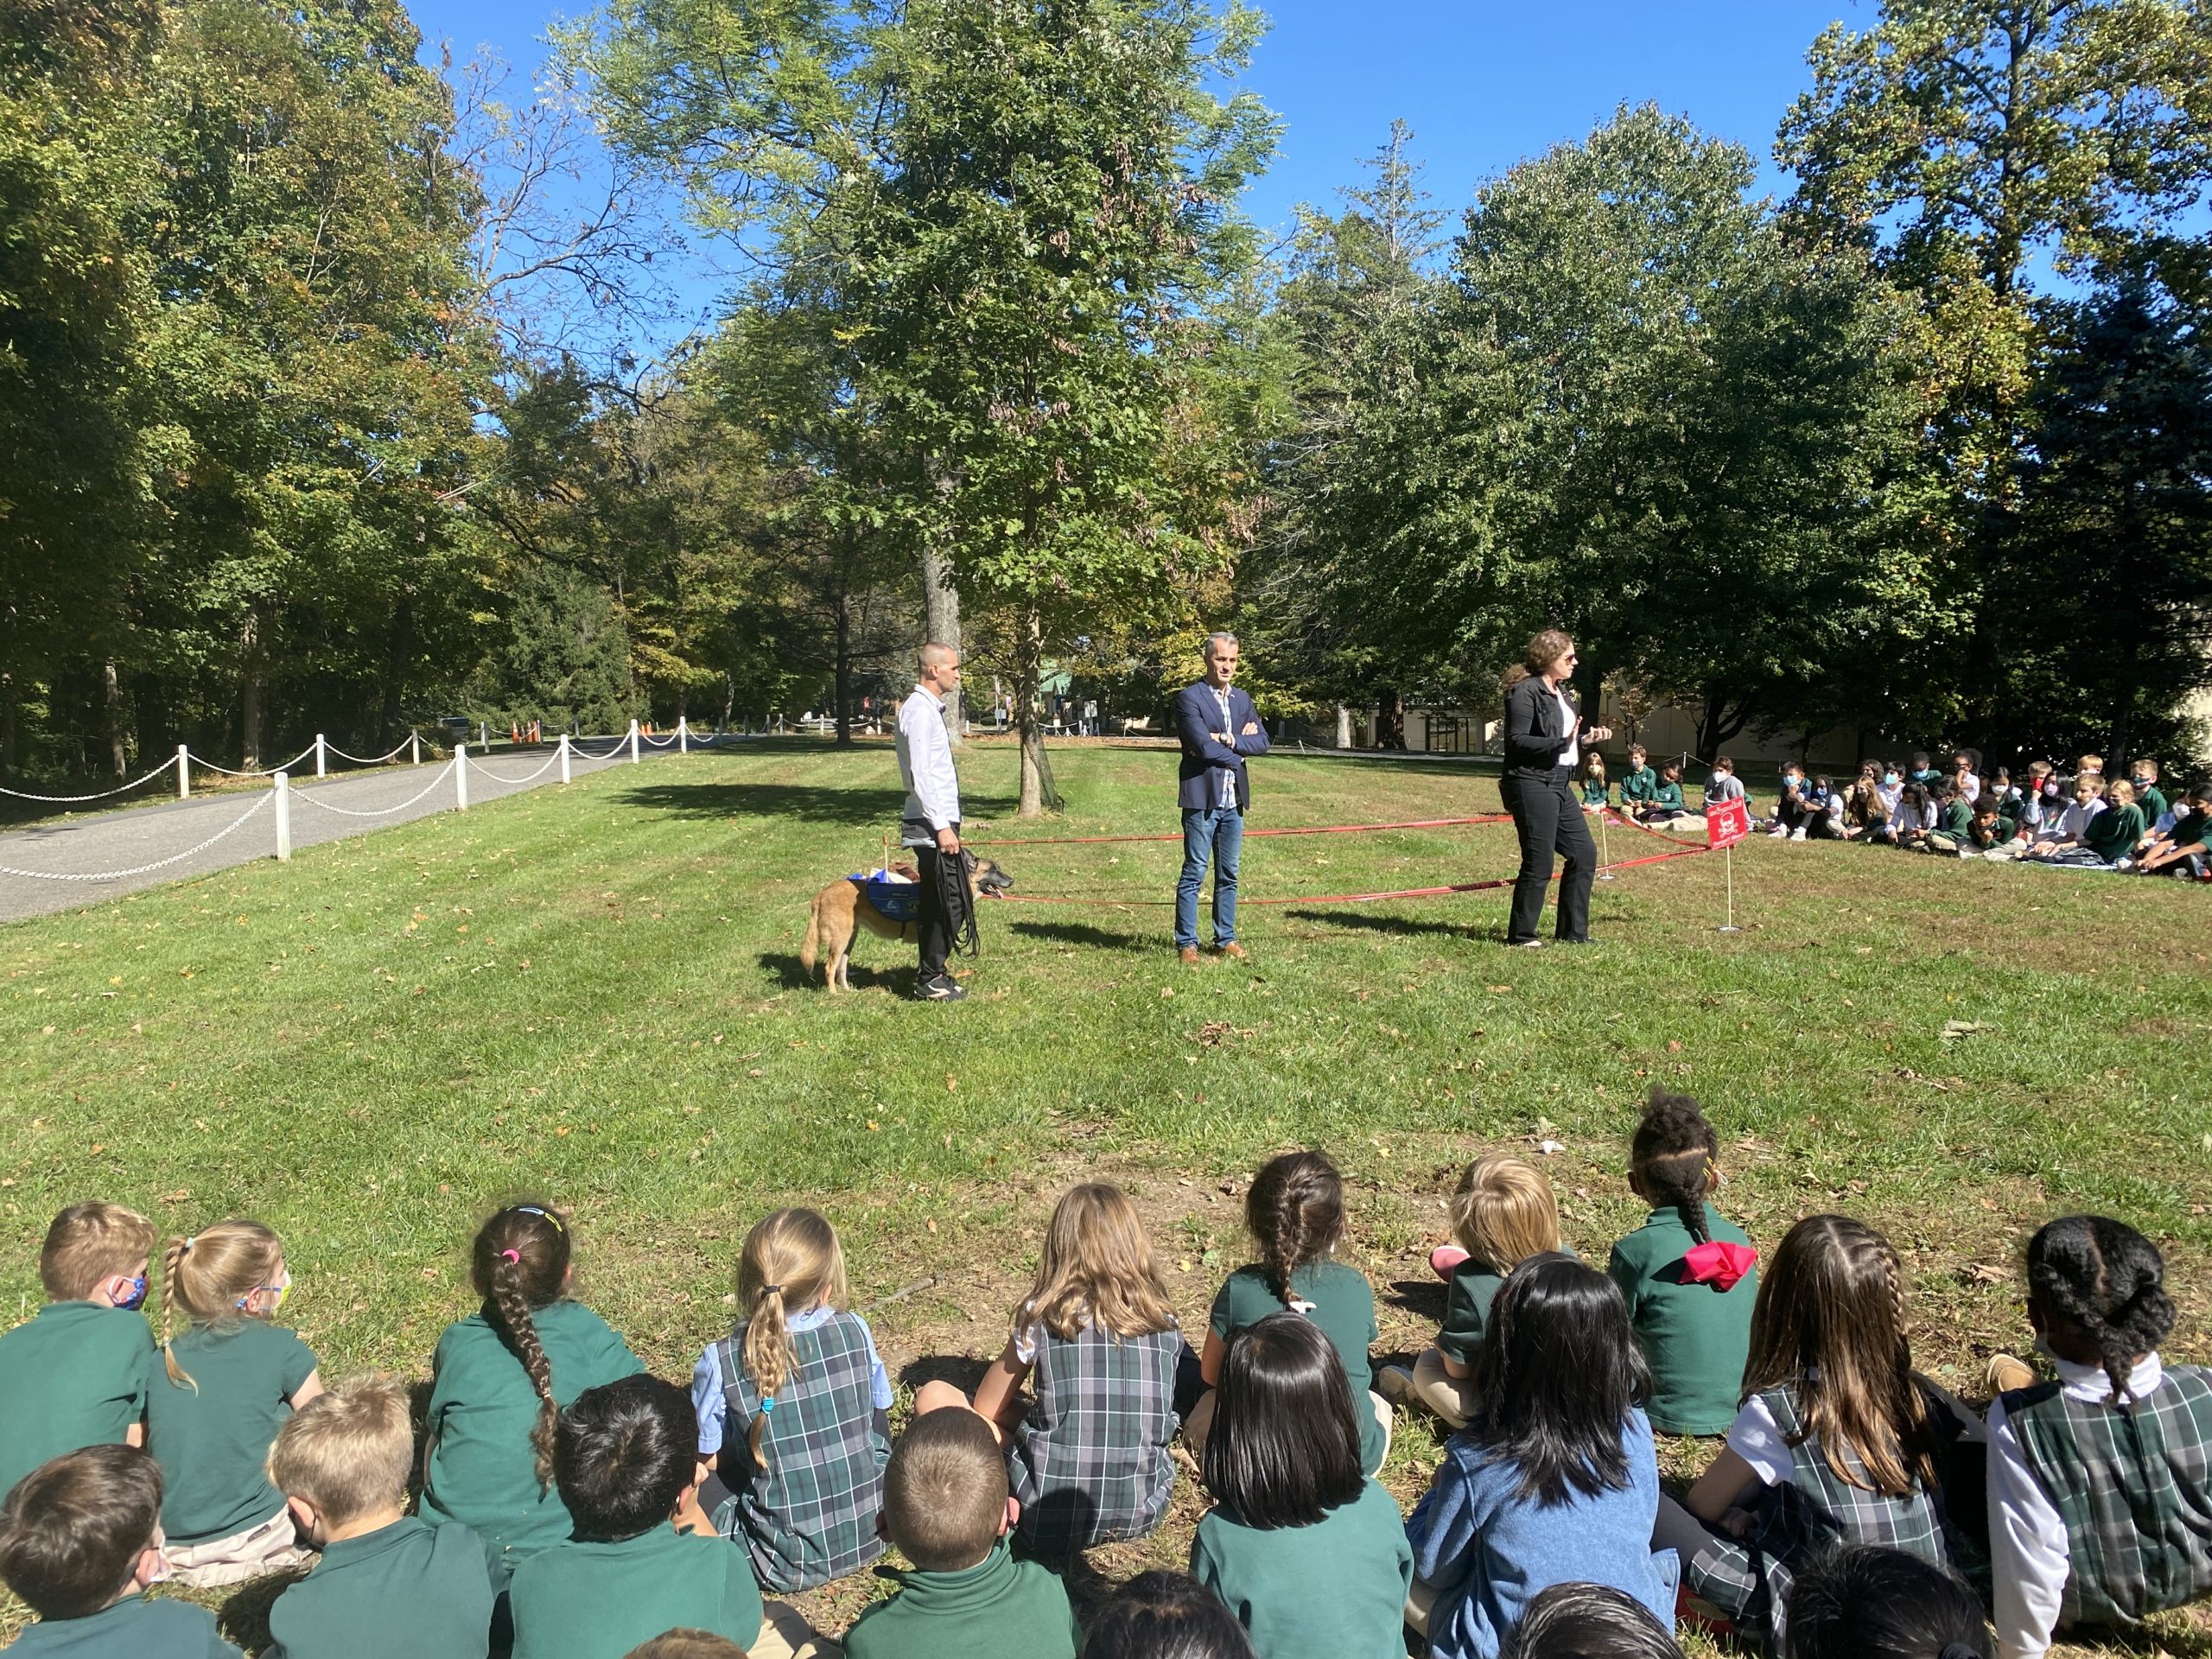 Staff from the Marshall Legacy Institute demostrate a mine detection dog's skills in front of students sitting in a semi-circle on grass.